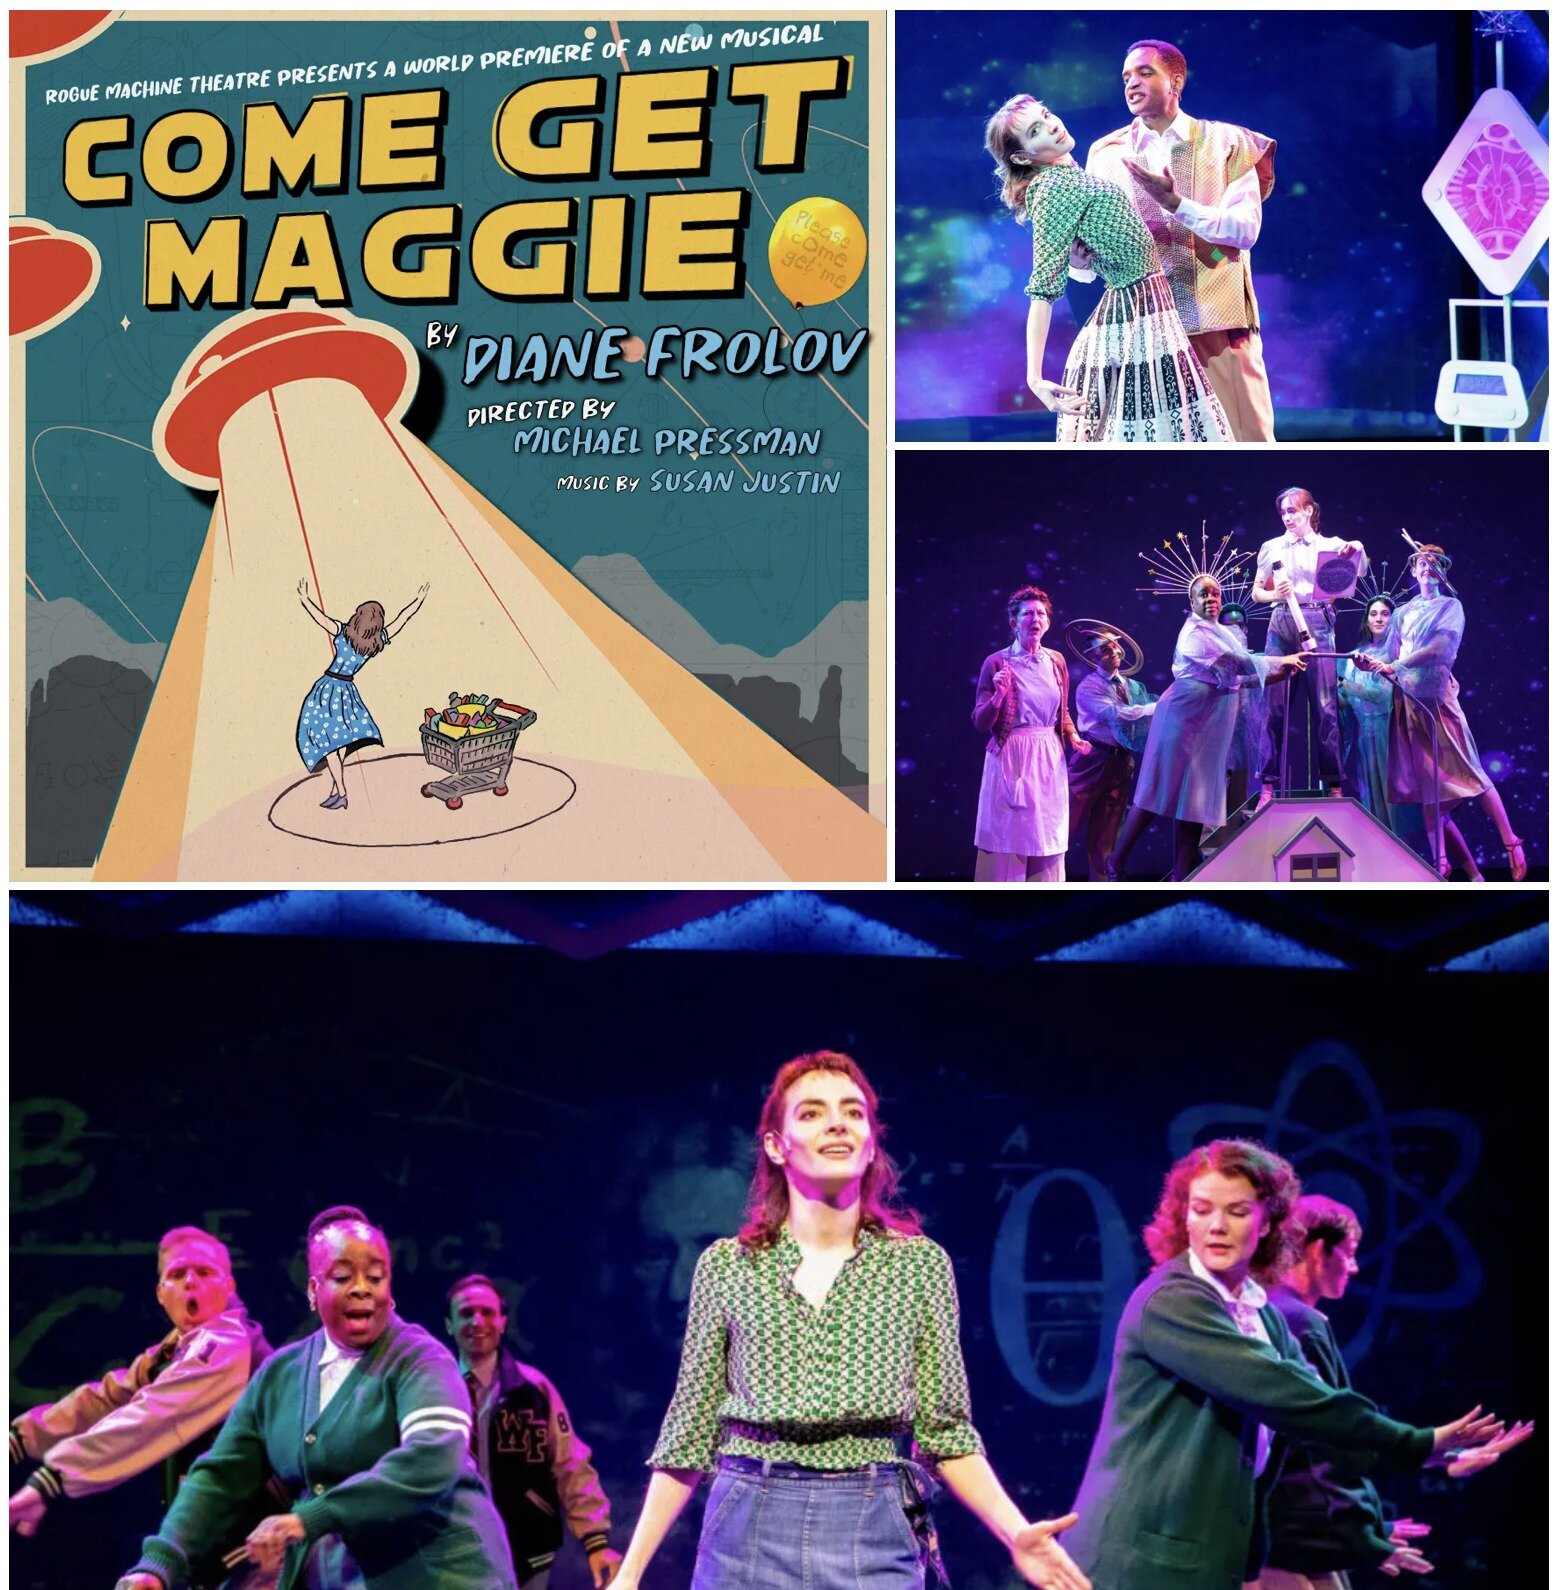 &ldquo;Fabulous singers and the actors deliver comedy and kinetics that keeps the audience engaged and entertained&rdquo; - @Glamgical

Don't miss it! Tickets on sale at RogueMachine.Ludus.com 🛸👽🚀

#ComeGetMaggie #ComeGetMaggieMusical #musicalthea